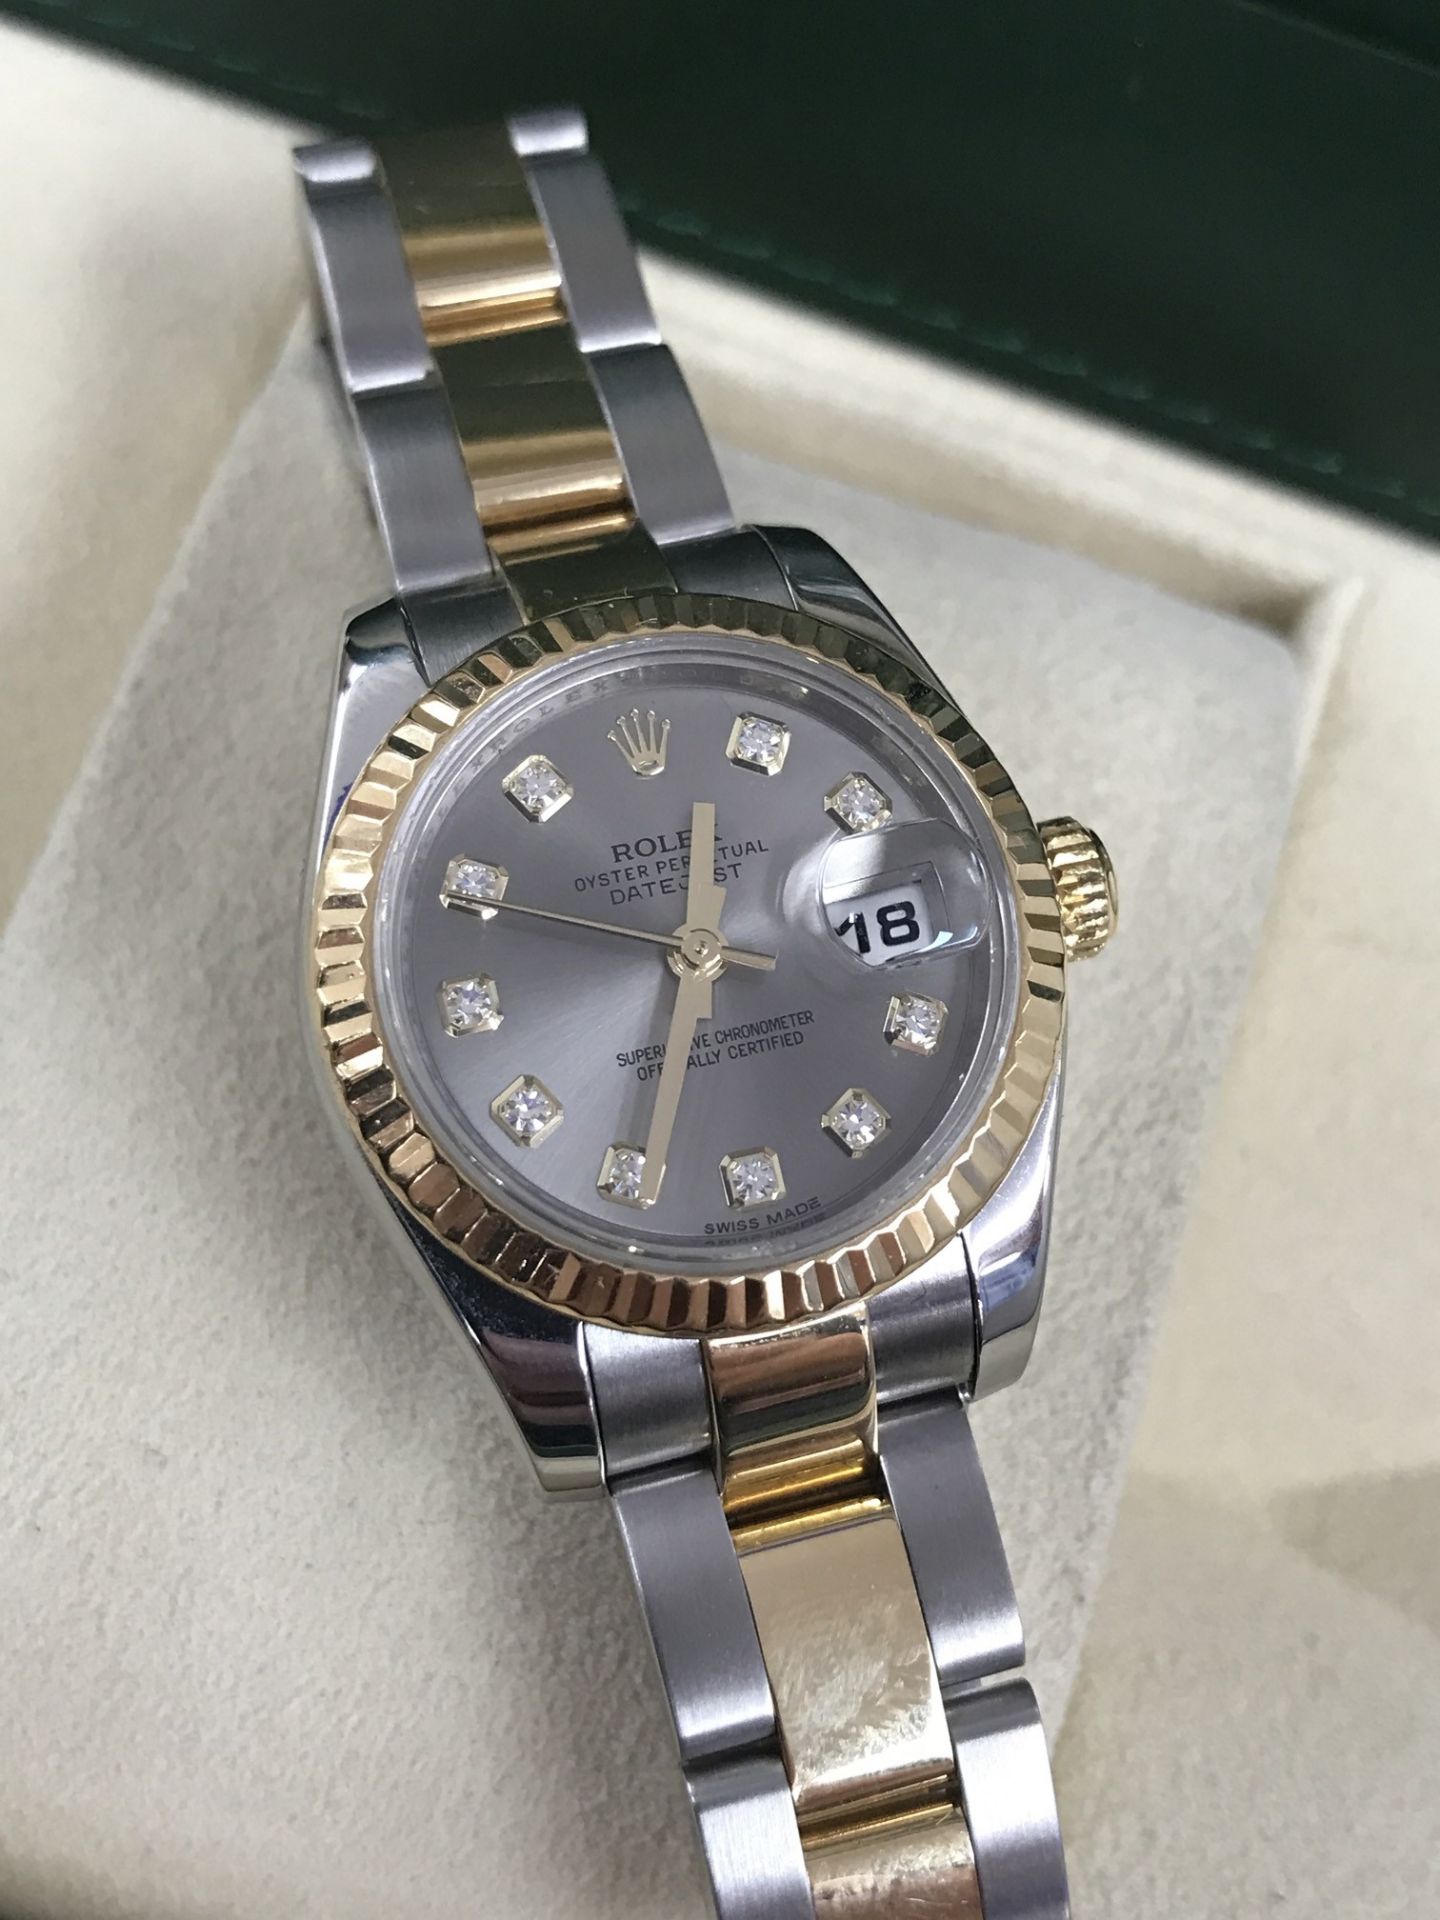 LADIES STEEL & GOLD ROLEX DATEJUST SET WITH DIAMONDS WITH BOX & PAPERS - Image 7 of 10